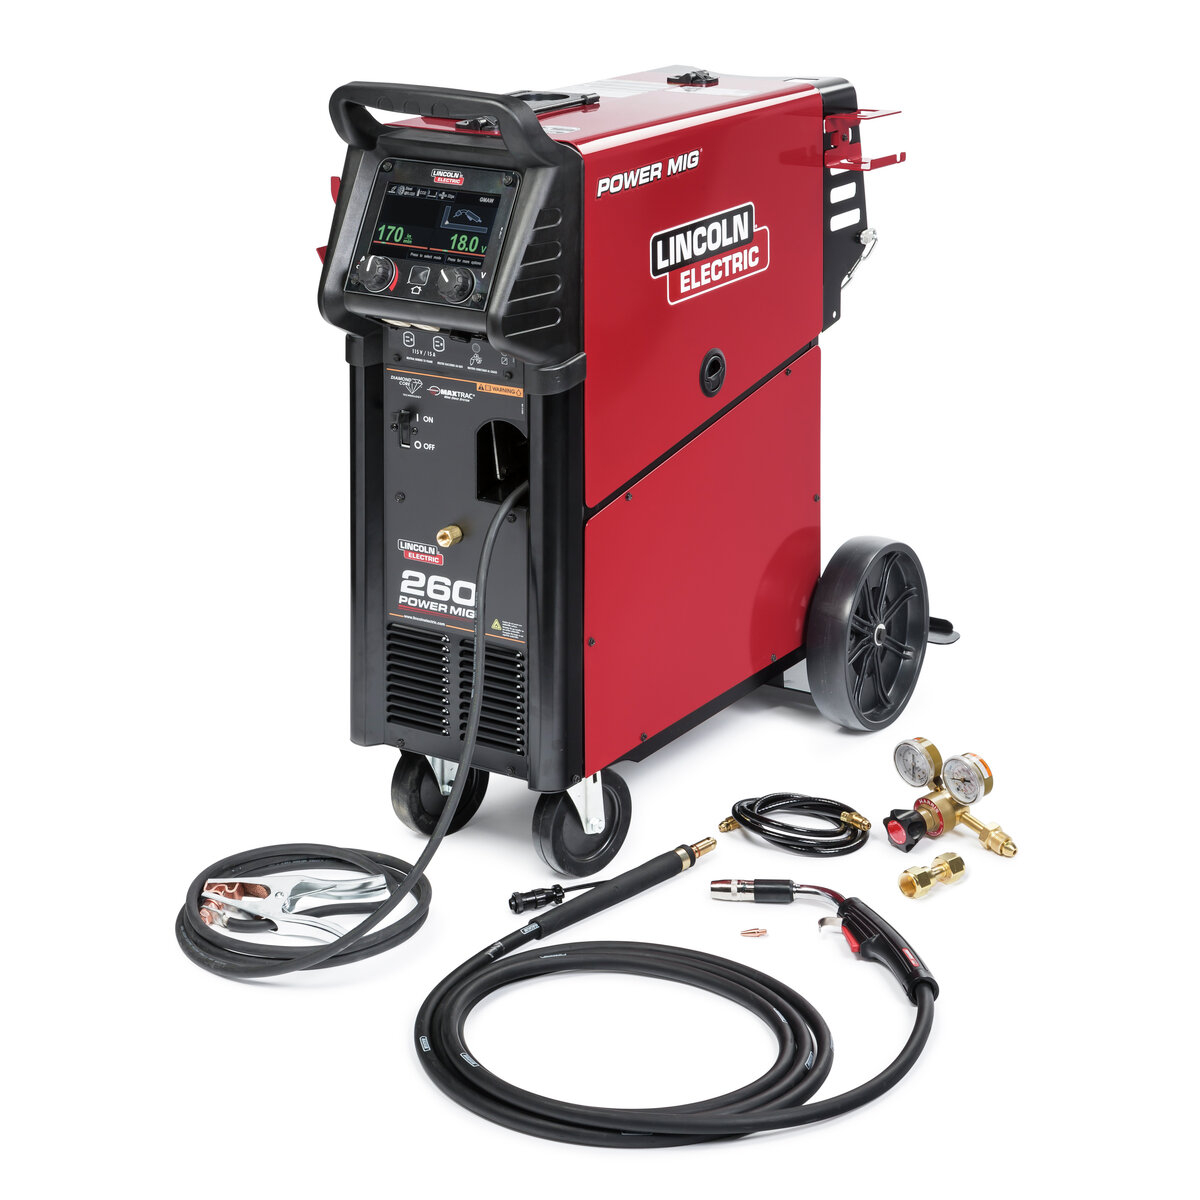 The POWER MIG 260 welding machine sets the standard for MIG and flux-cored welding in light industrial shop fabrication, maintenance, and repair work.